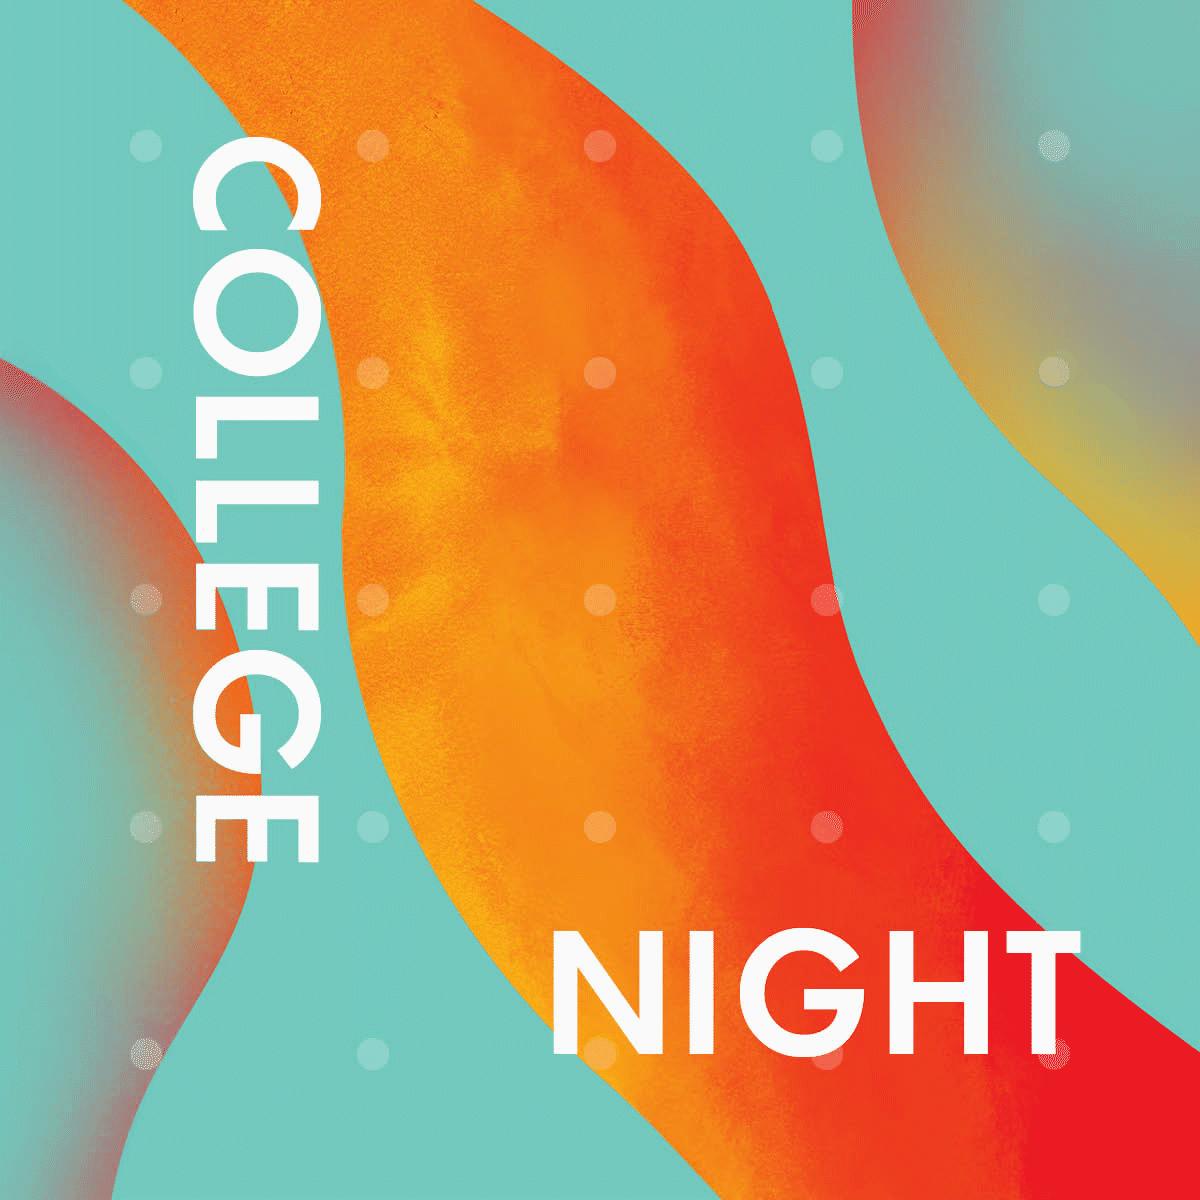 A motion graphic in teal and orange waves announcing college night in white text.